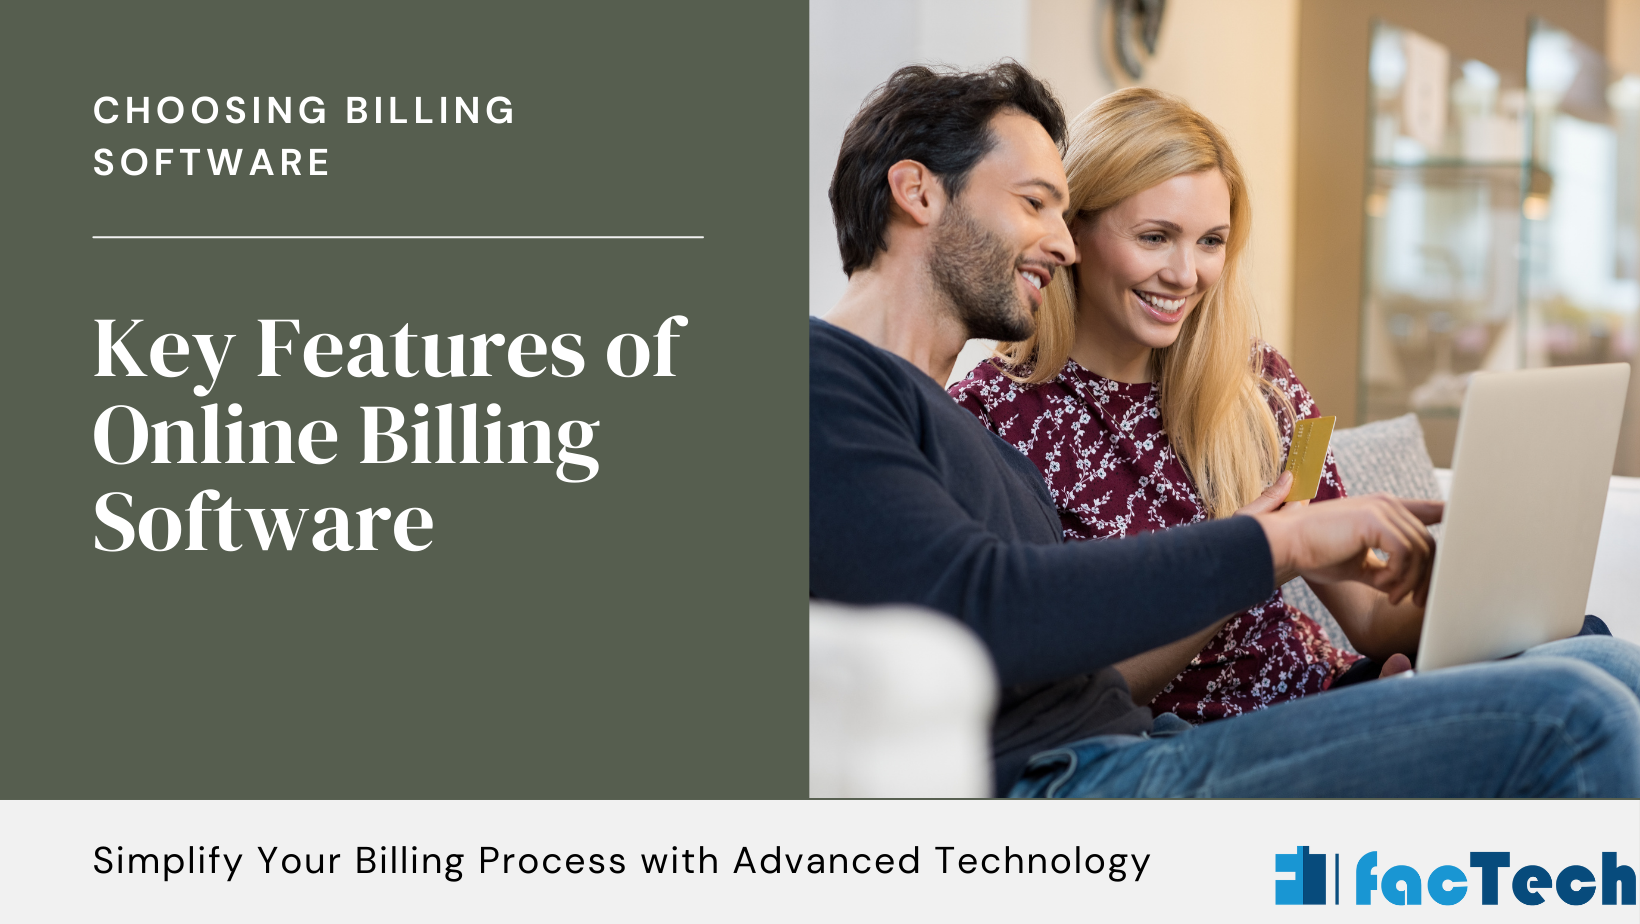 Key Features of Online Billing Software